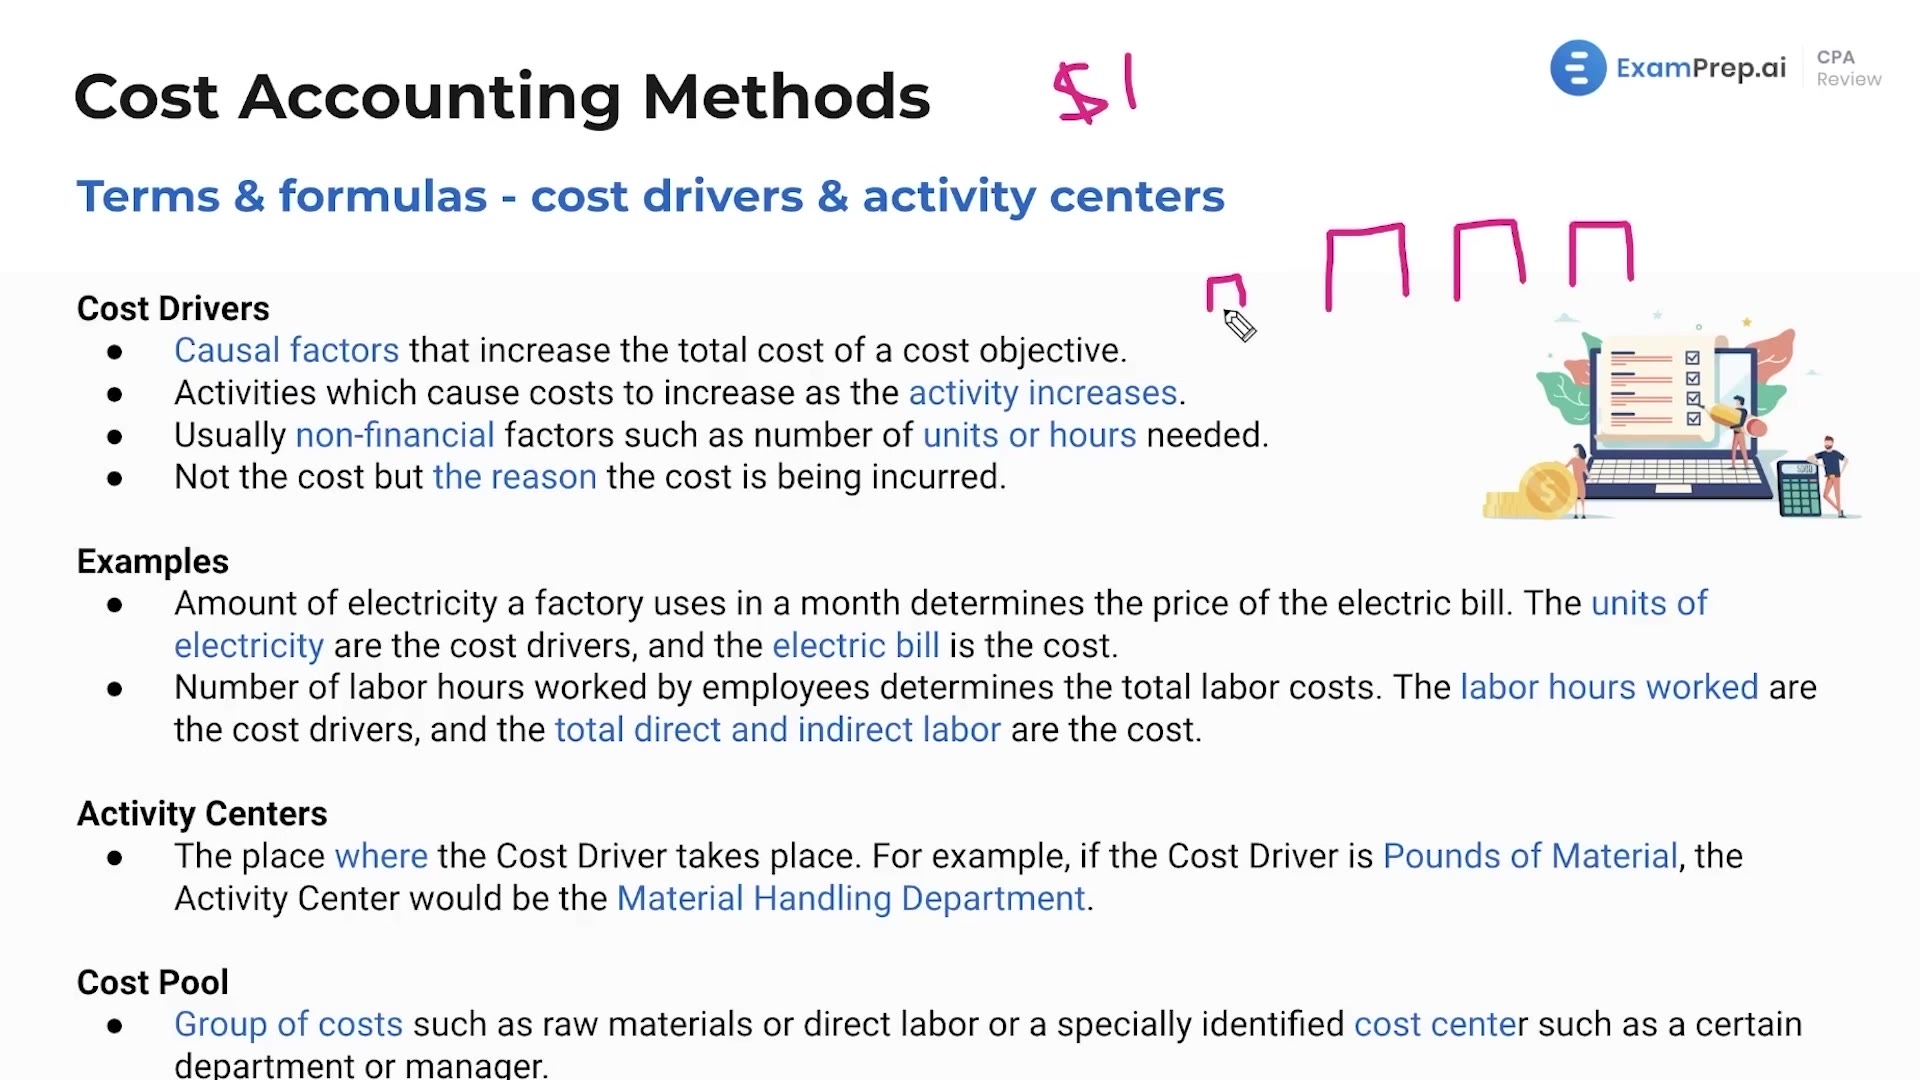 Cost Drivers and Activity Centers - Quick Refresher lesson thumbnail